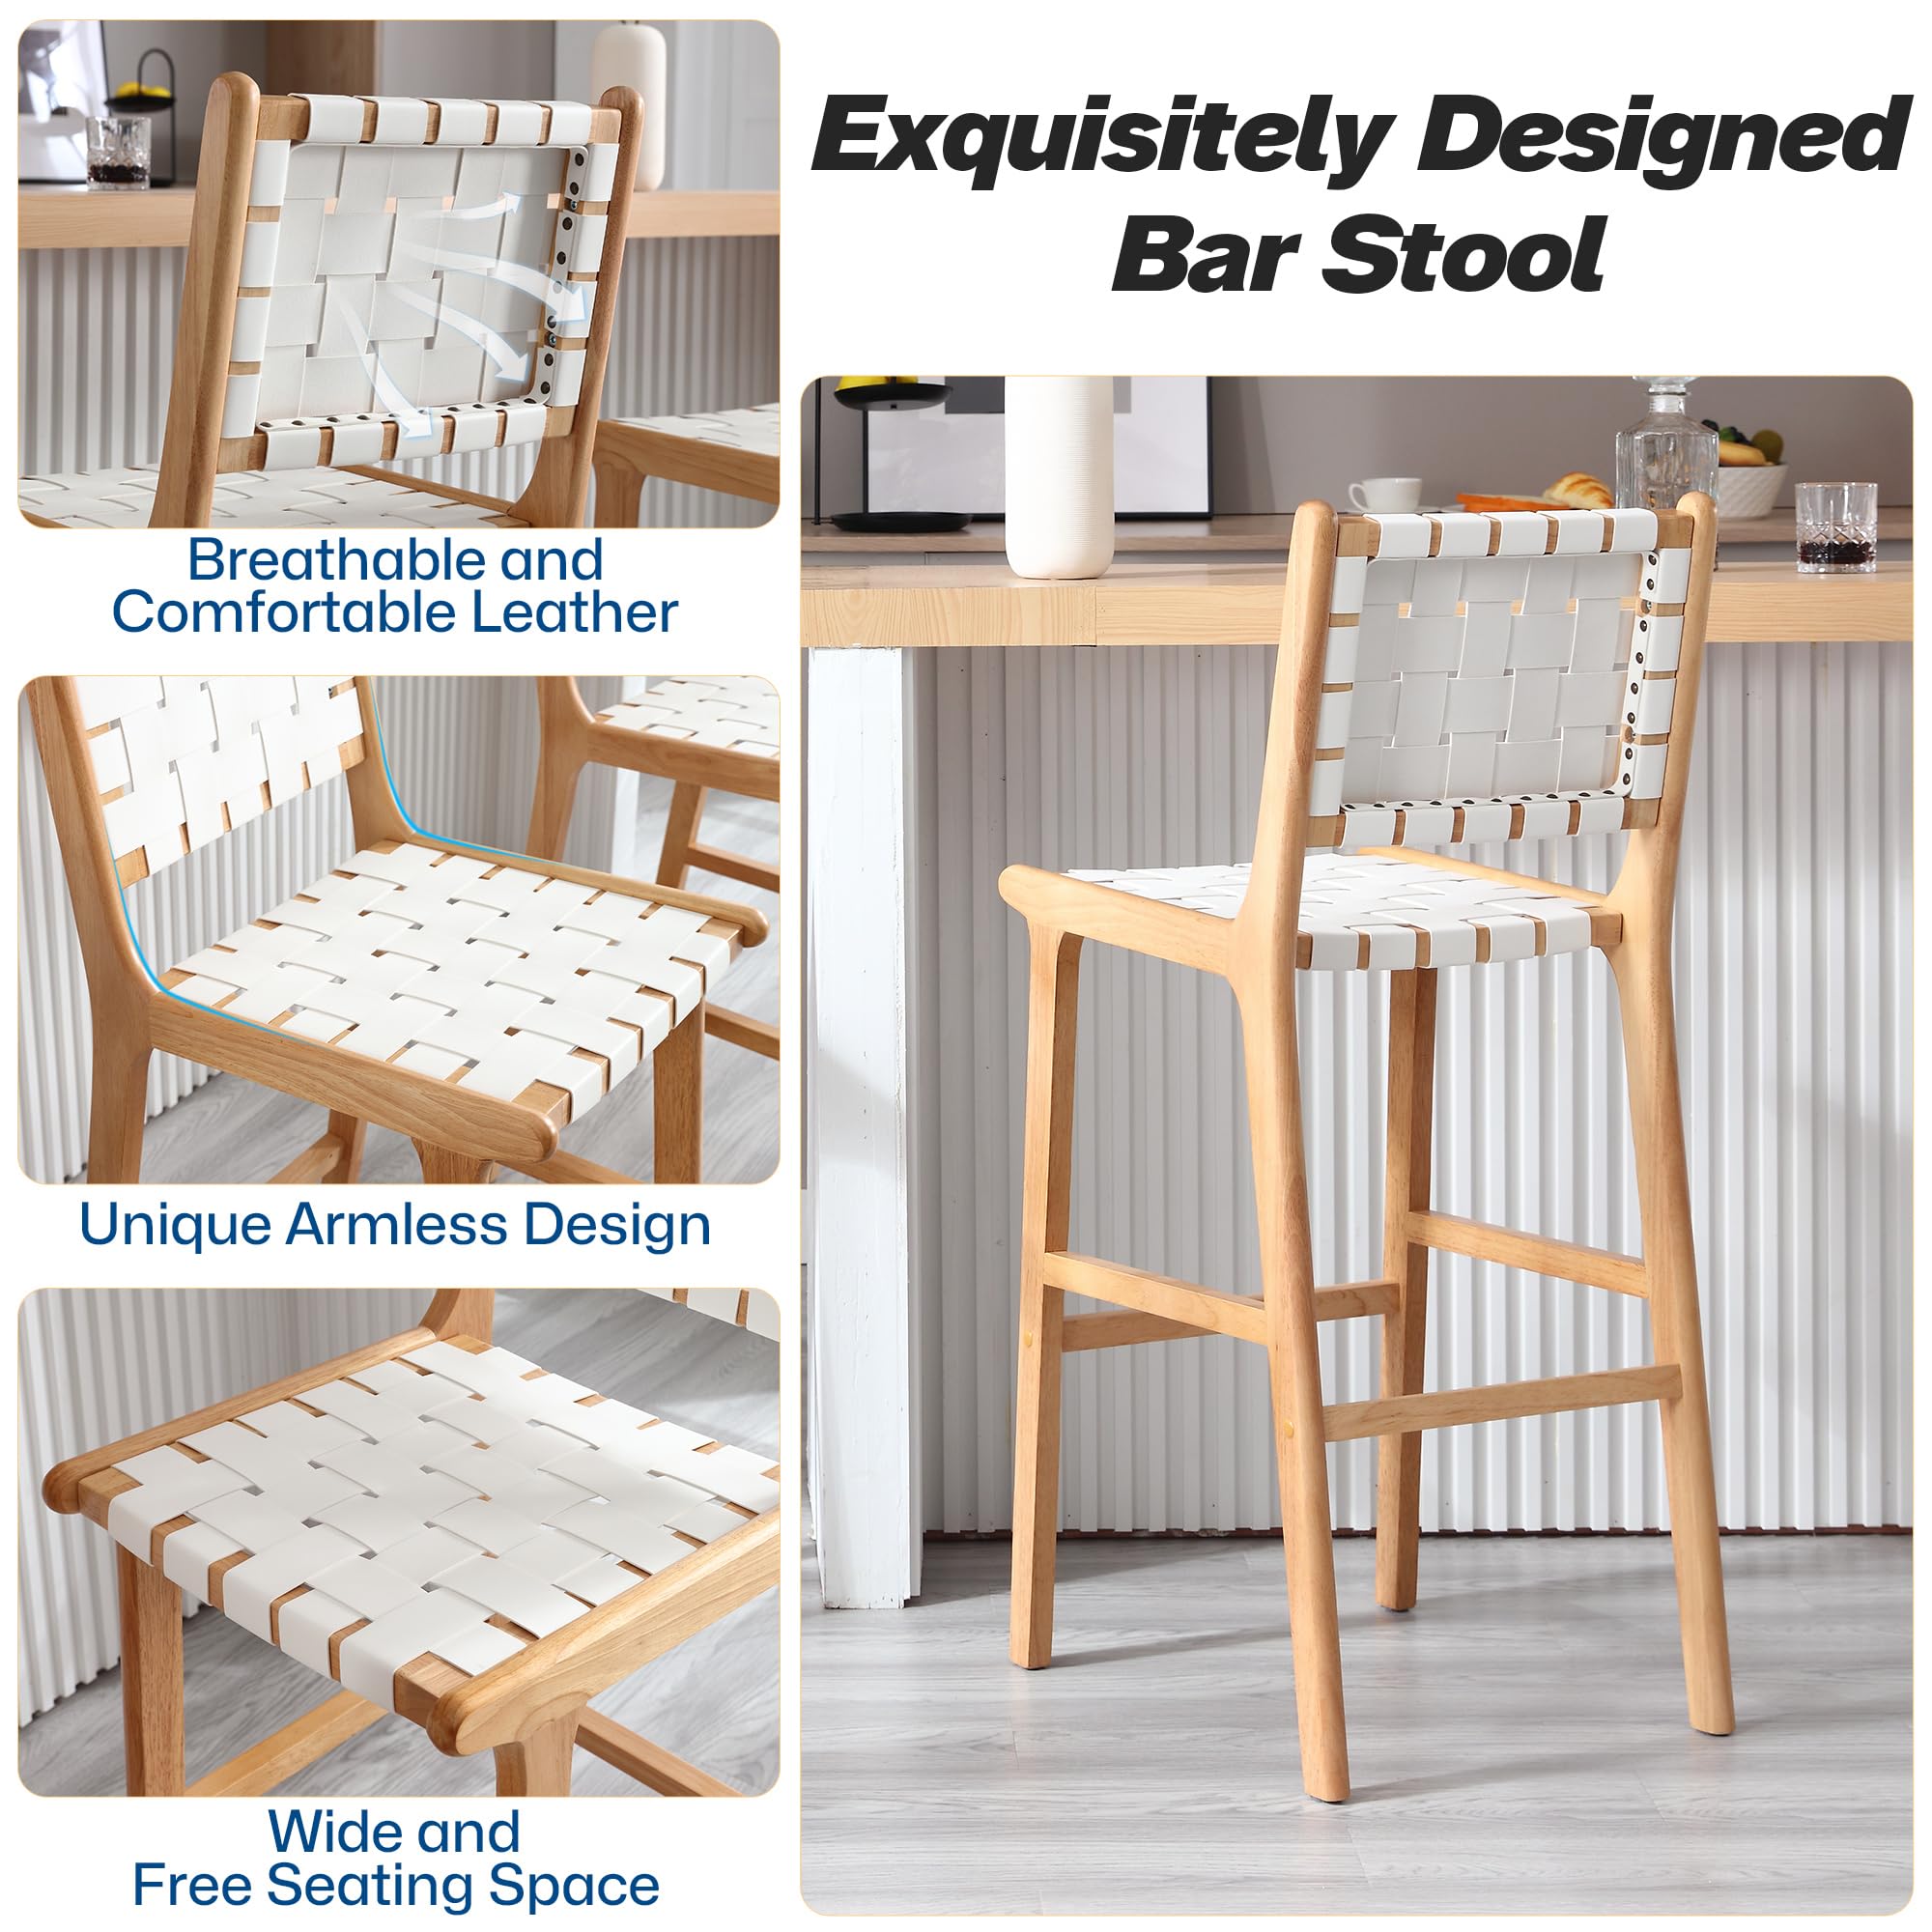 GOOLON Faux Leather Bar Stools Set of 2, 29" Bar Height Stools for Kitchen Island, Modern Farmhouse Barstools with Woven Back Comfy Seat Wood Frame and Footrest for Home Pub Patio, White